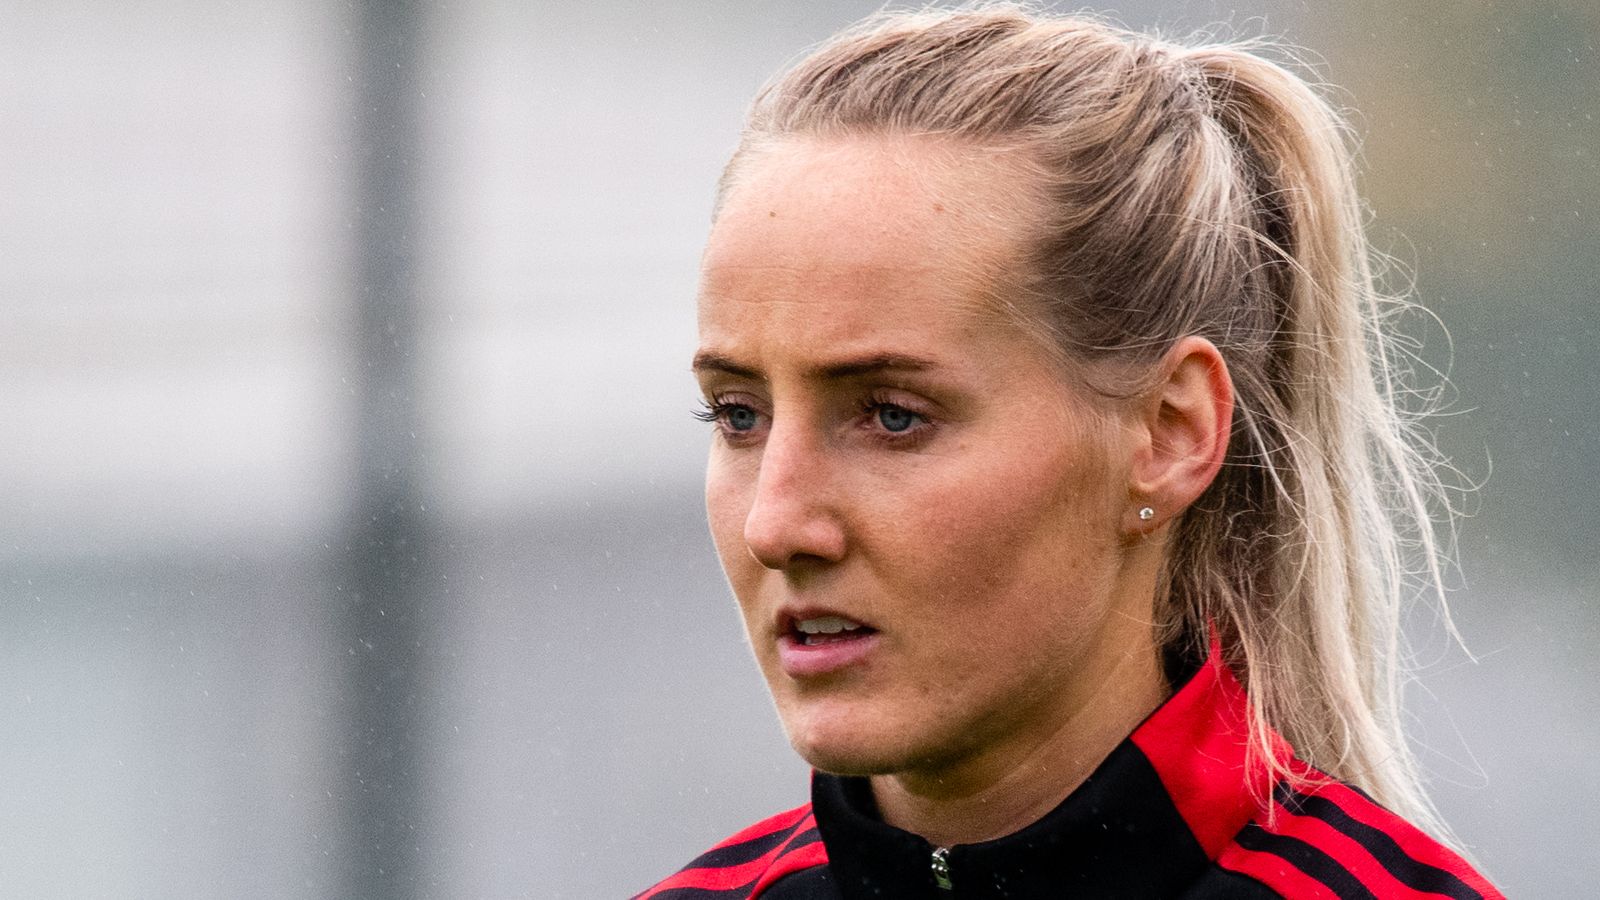 Manchester United Women's Millie Turner out indefinitely due to 'issue with artery in her neck'